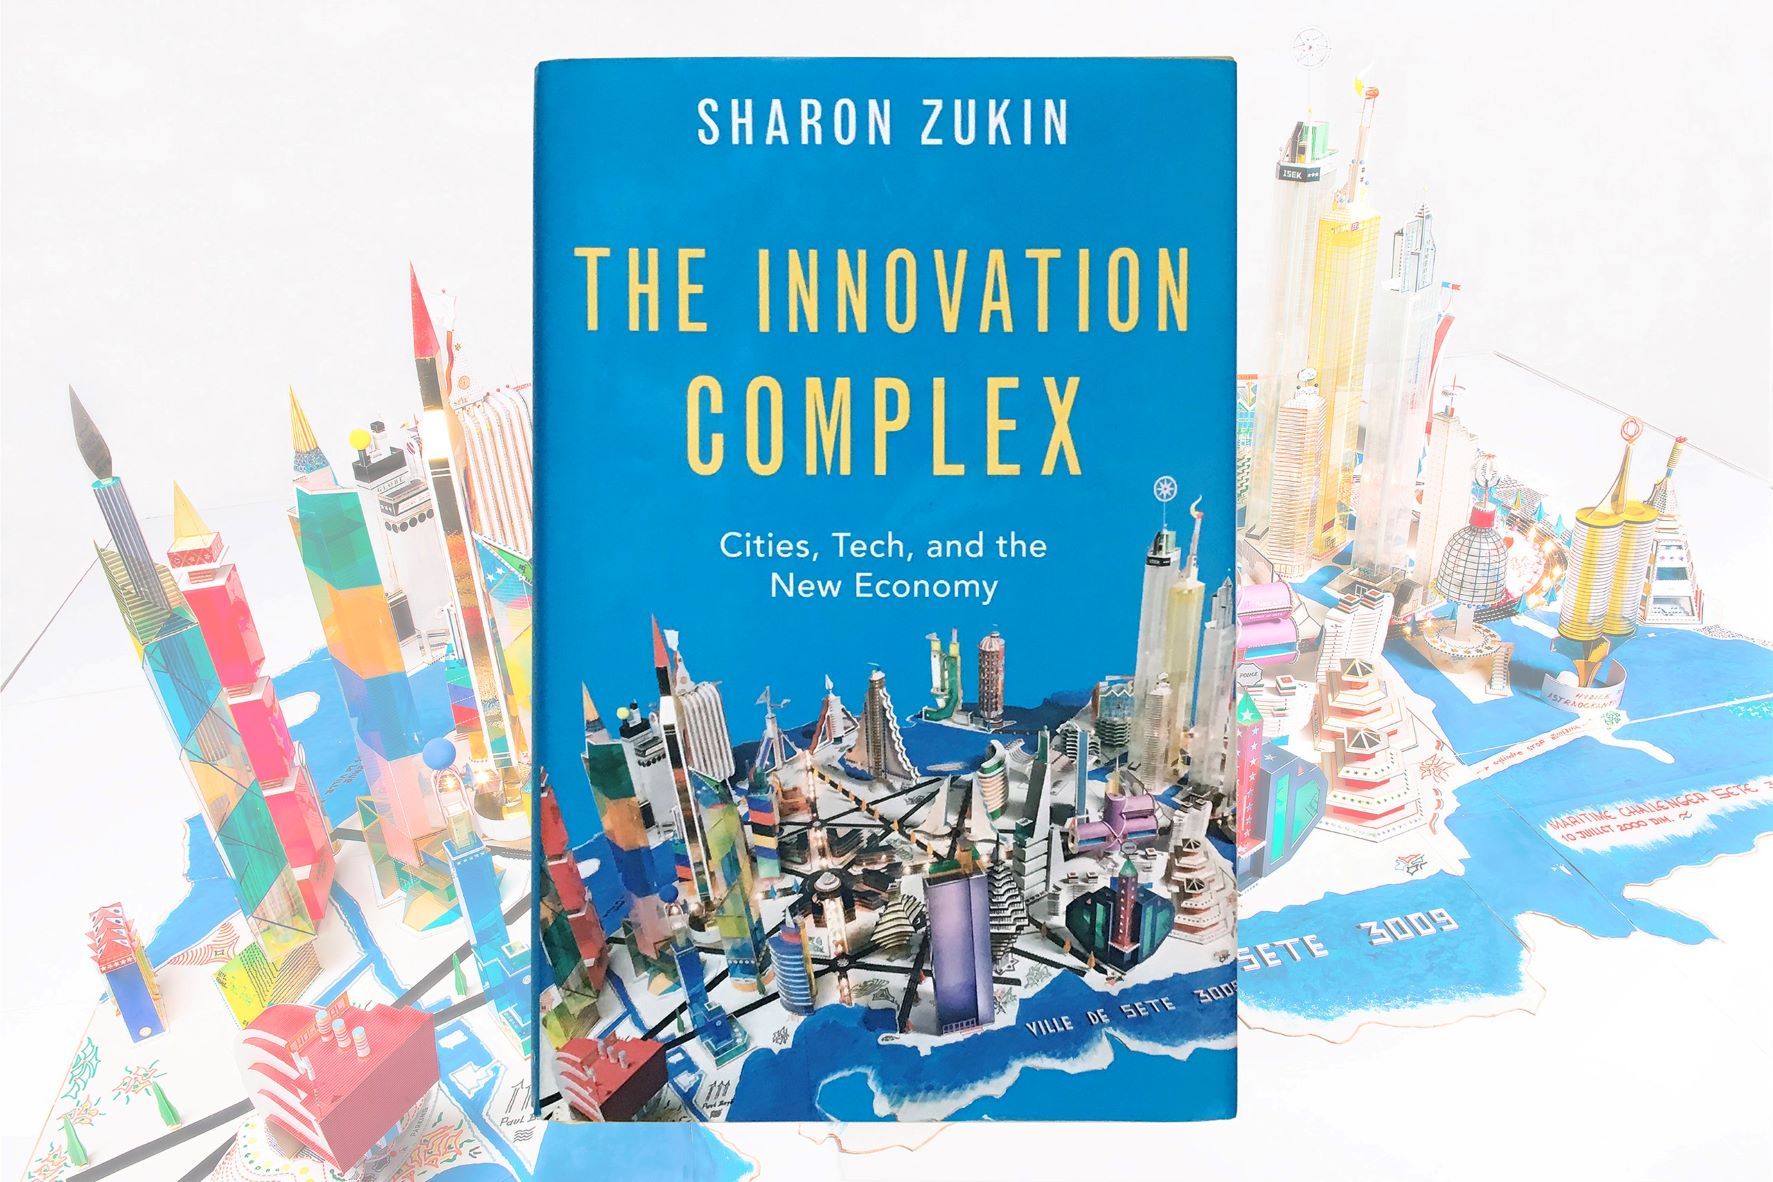 Book Cover of The Innovation Complex by Sharon Zukin